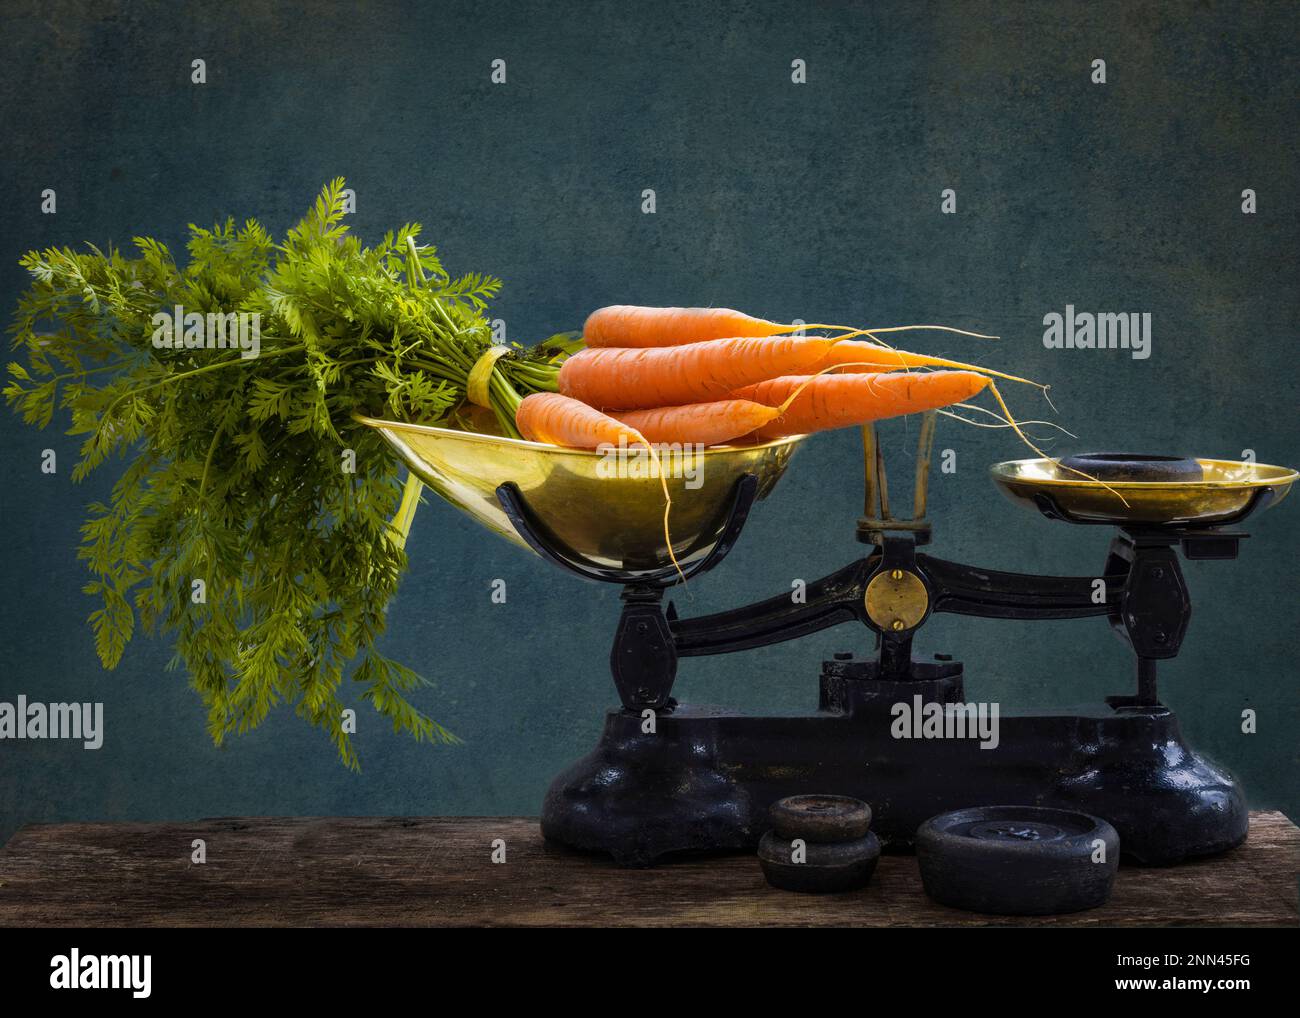 A bunch of carrots with leaves being weighed on an old fashioned, traditional set of imperial weight scales Stock Photo